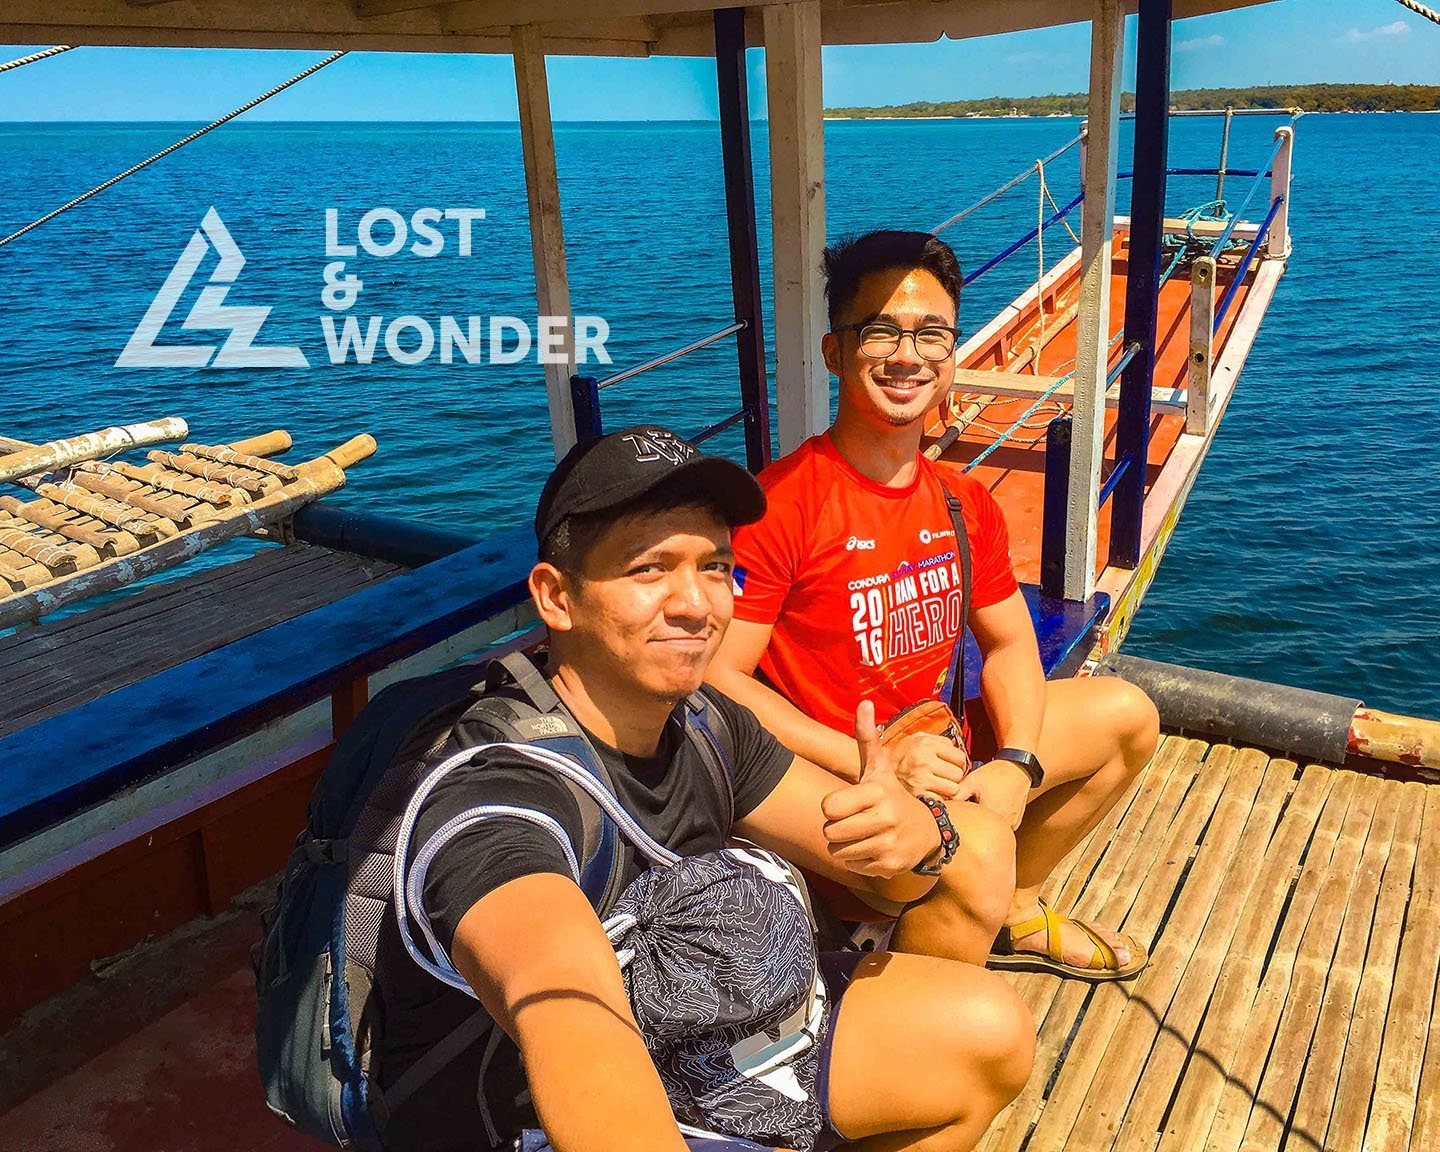 Photos of content creators of Lost and Wonder in Magalawa Island